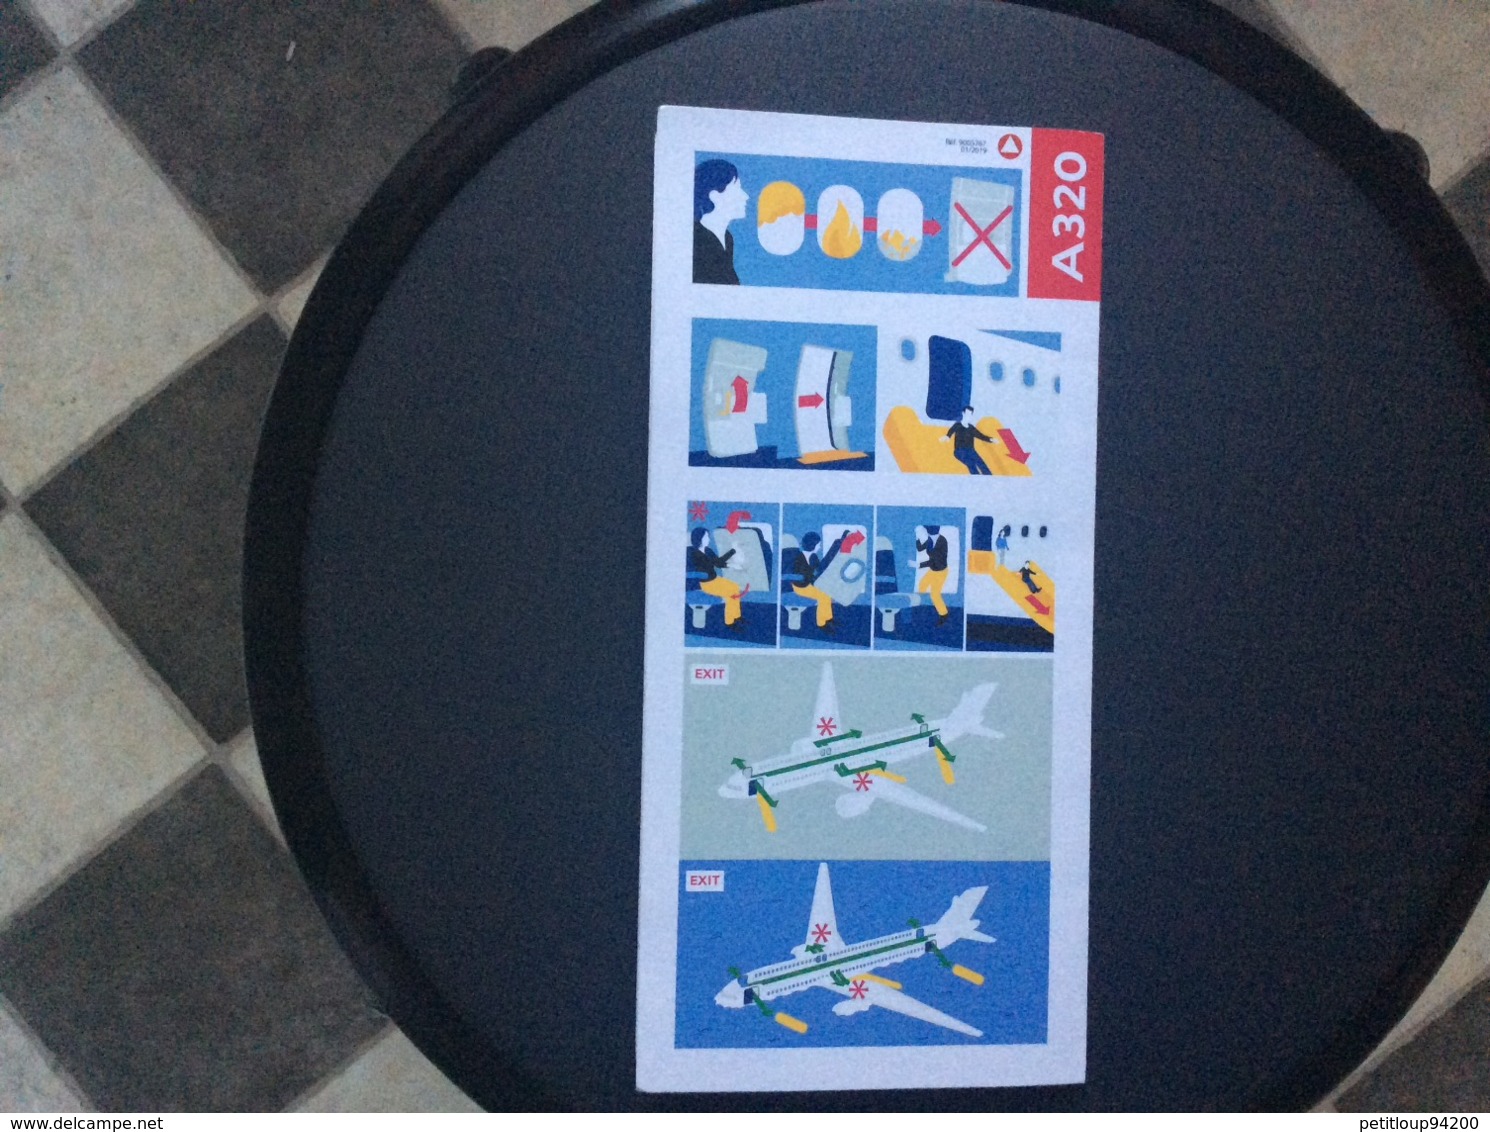 CONSIGNES DE SECURITE / SAFETY CARD  *Airbus A 320   AIR FRANCE  JOON - Safety Cards